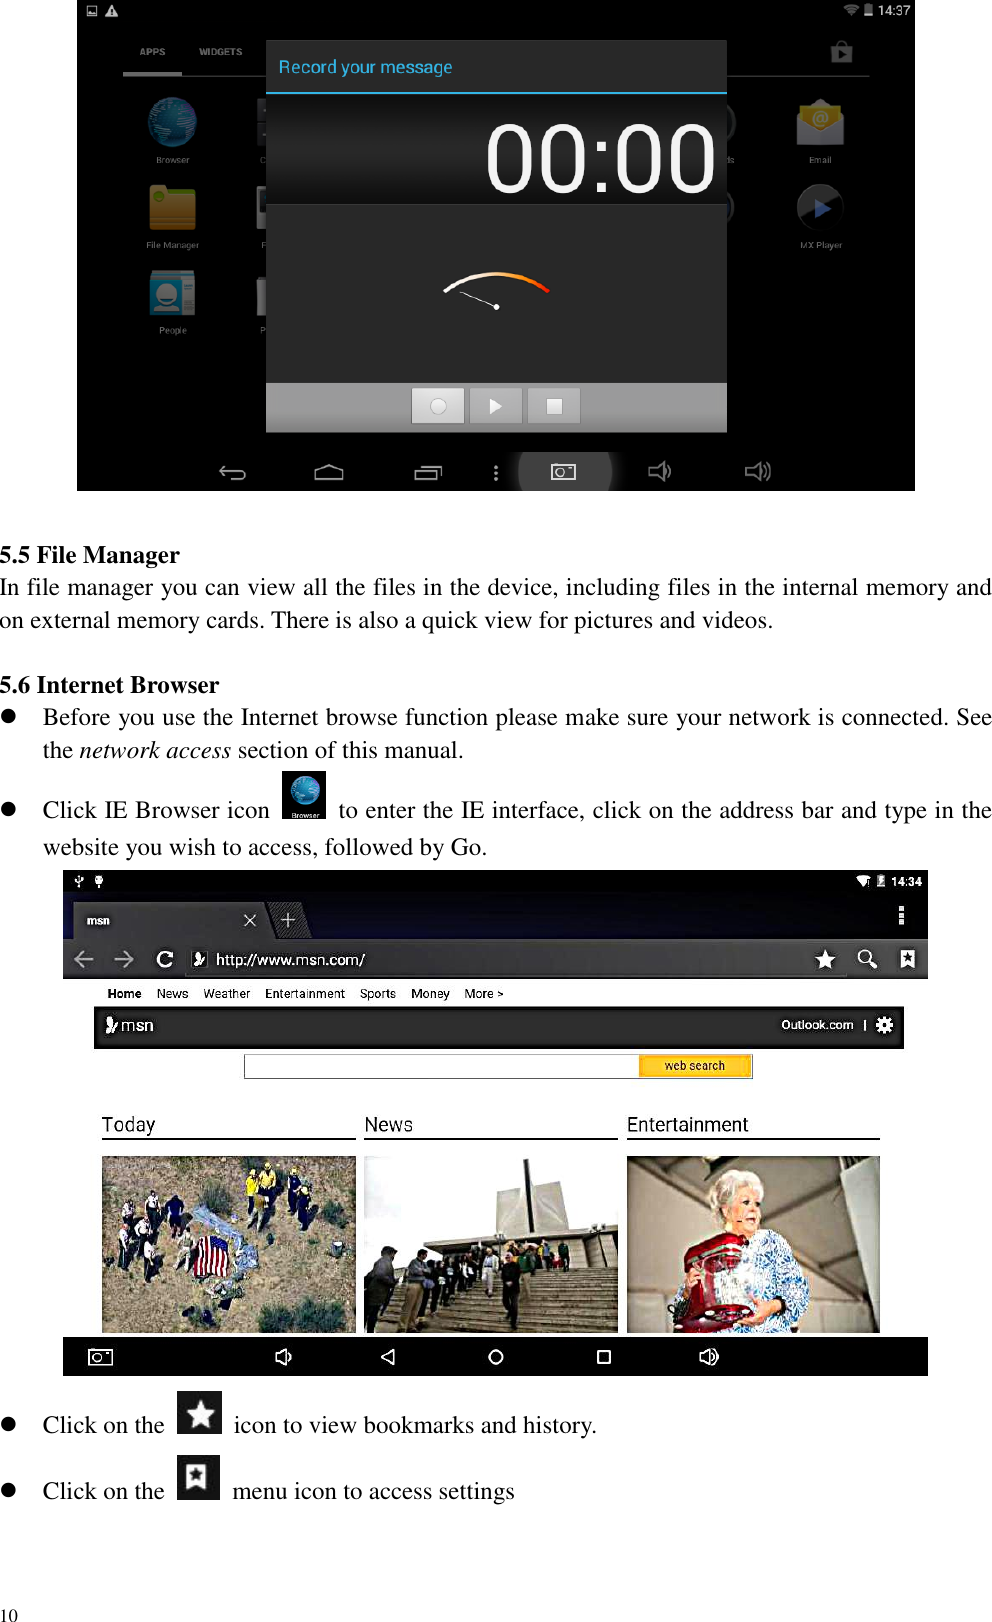 10     5.5 File Manager In file manager you can view all the files in the device, including files in the internal memory and on external memory cards. There is also a quick view for pictures and videos.  5.6 Internet Browser  Before you use the Internet browse function please make sure your network is connected. See the network access section of this manual.  Click IE Browser icon    to enter the IE interface, click on the address bar and type in the website you wish to access, followed by Go.   Click on the    icon to view bookmarks and history.  Click on the    menu icon to access settings 